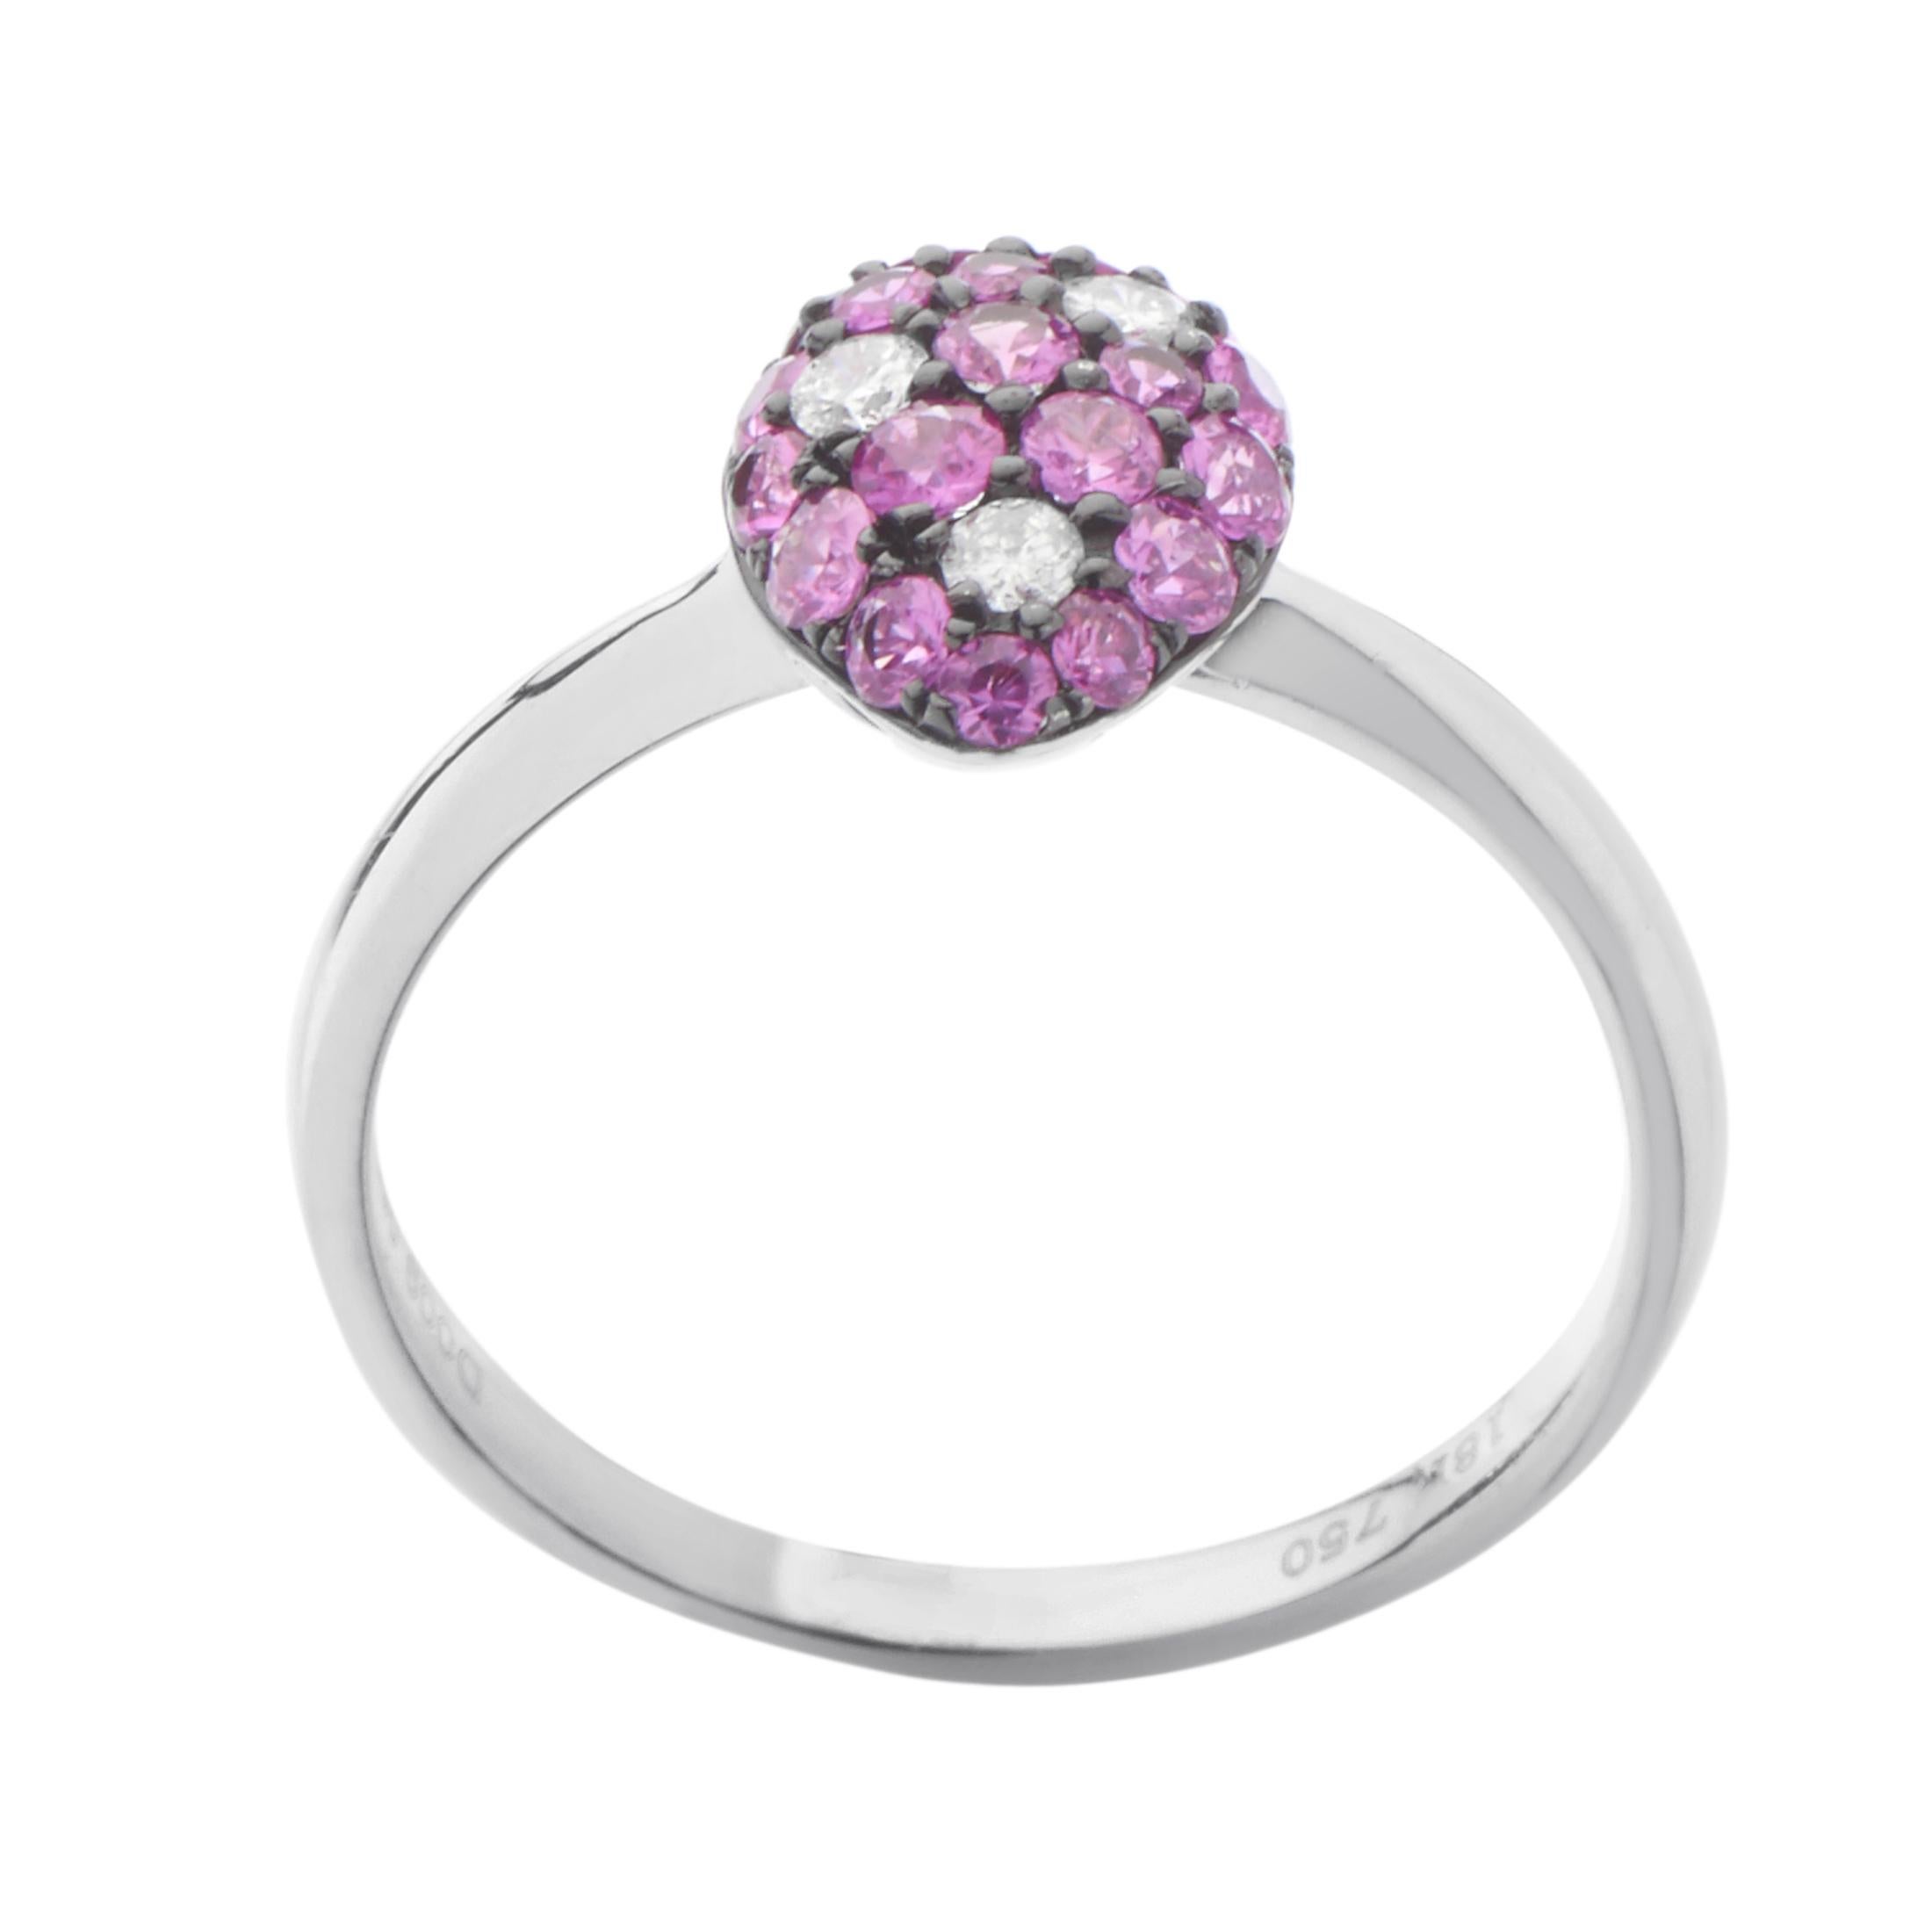 A gorgeous blend of romantic rubies weighing in total 0.55ct and glittering diamonds amounting to 0.09ct is placed upon a splendid 18K white gold body in this remarkably tasteful ring.
Ring Size: 8 x 10mm
